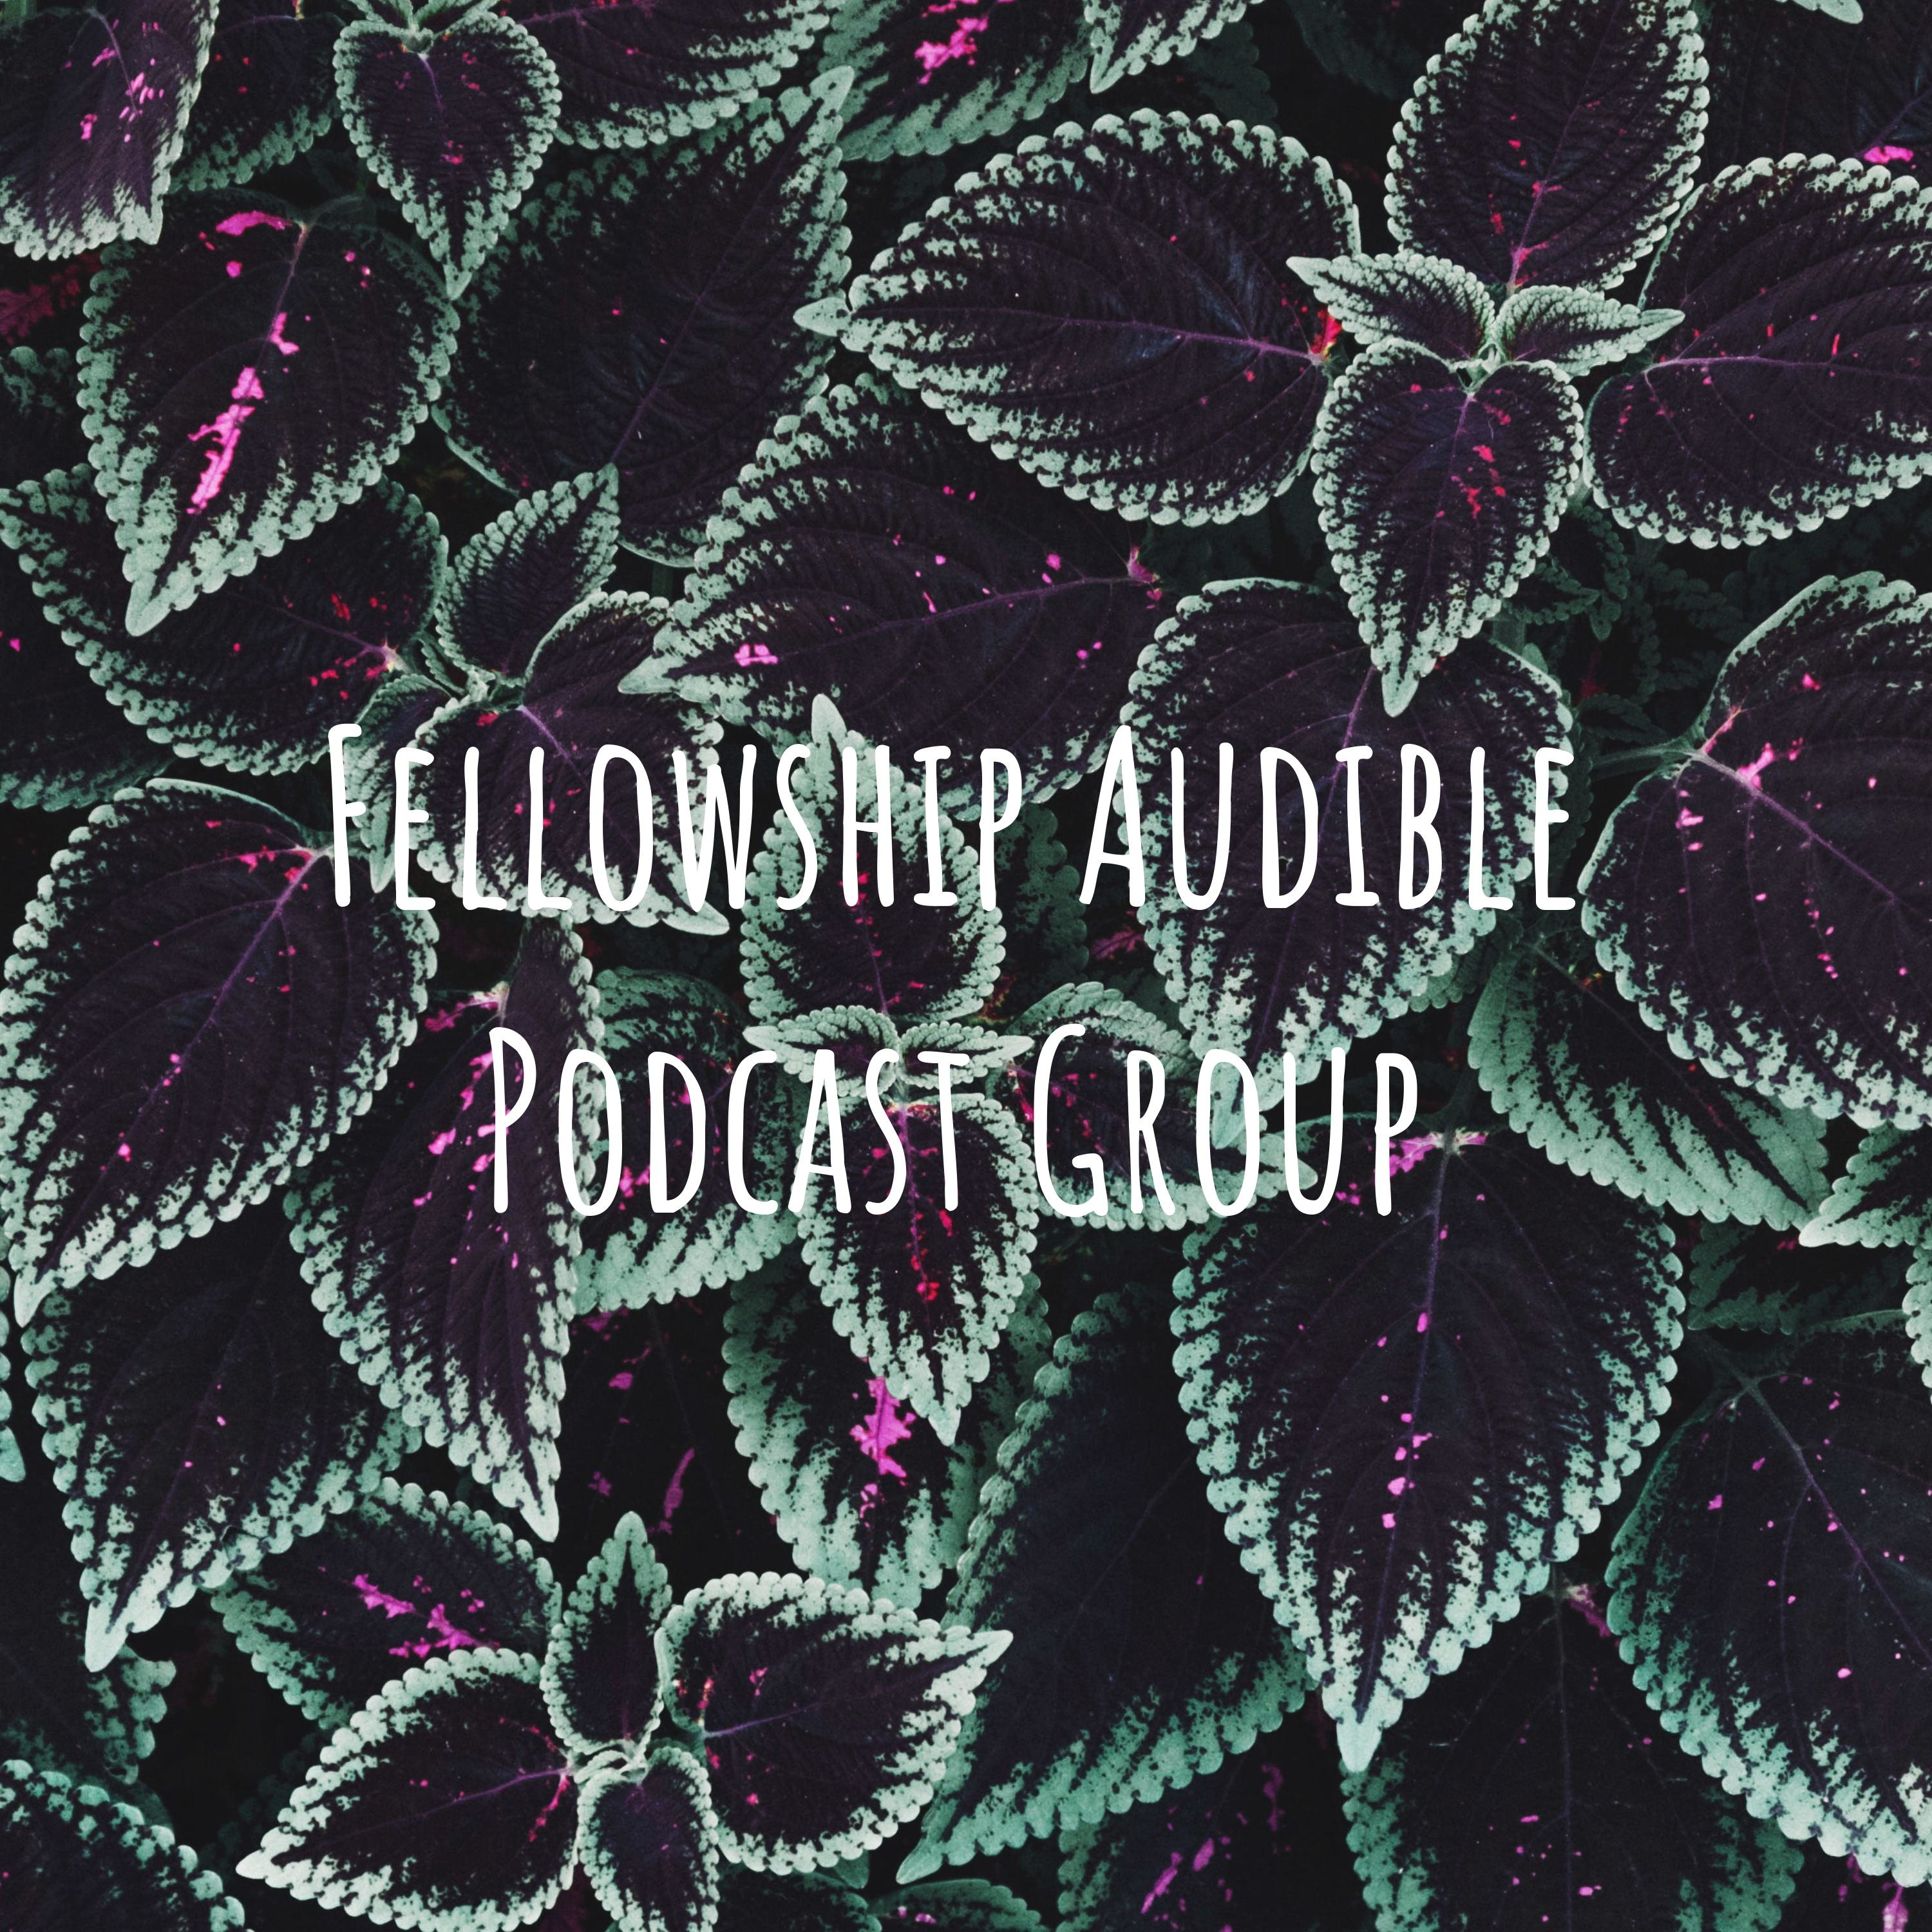 Fellowship Audio Podcast 26AUG19 | Hanging out with The Purple Symphony